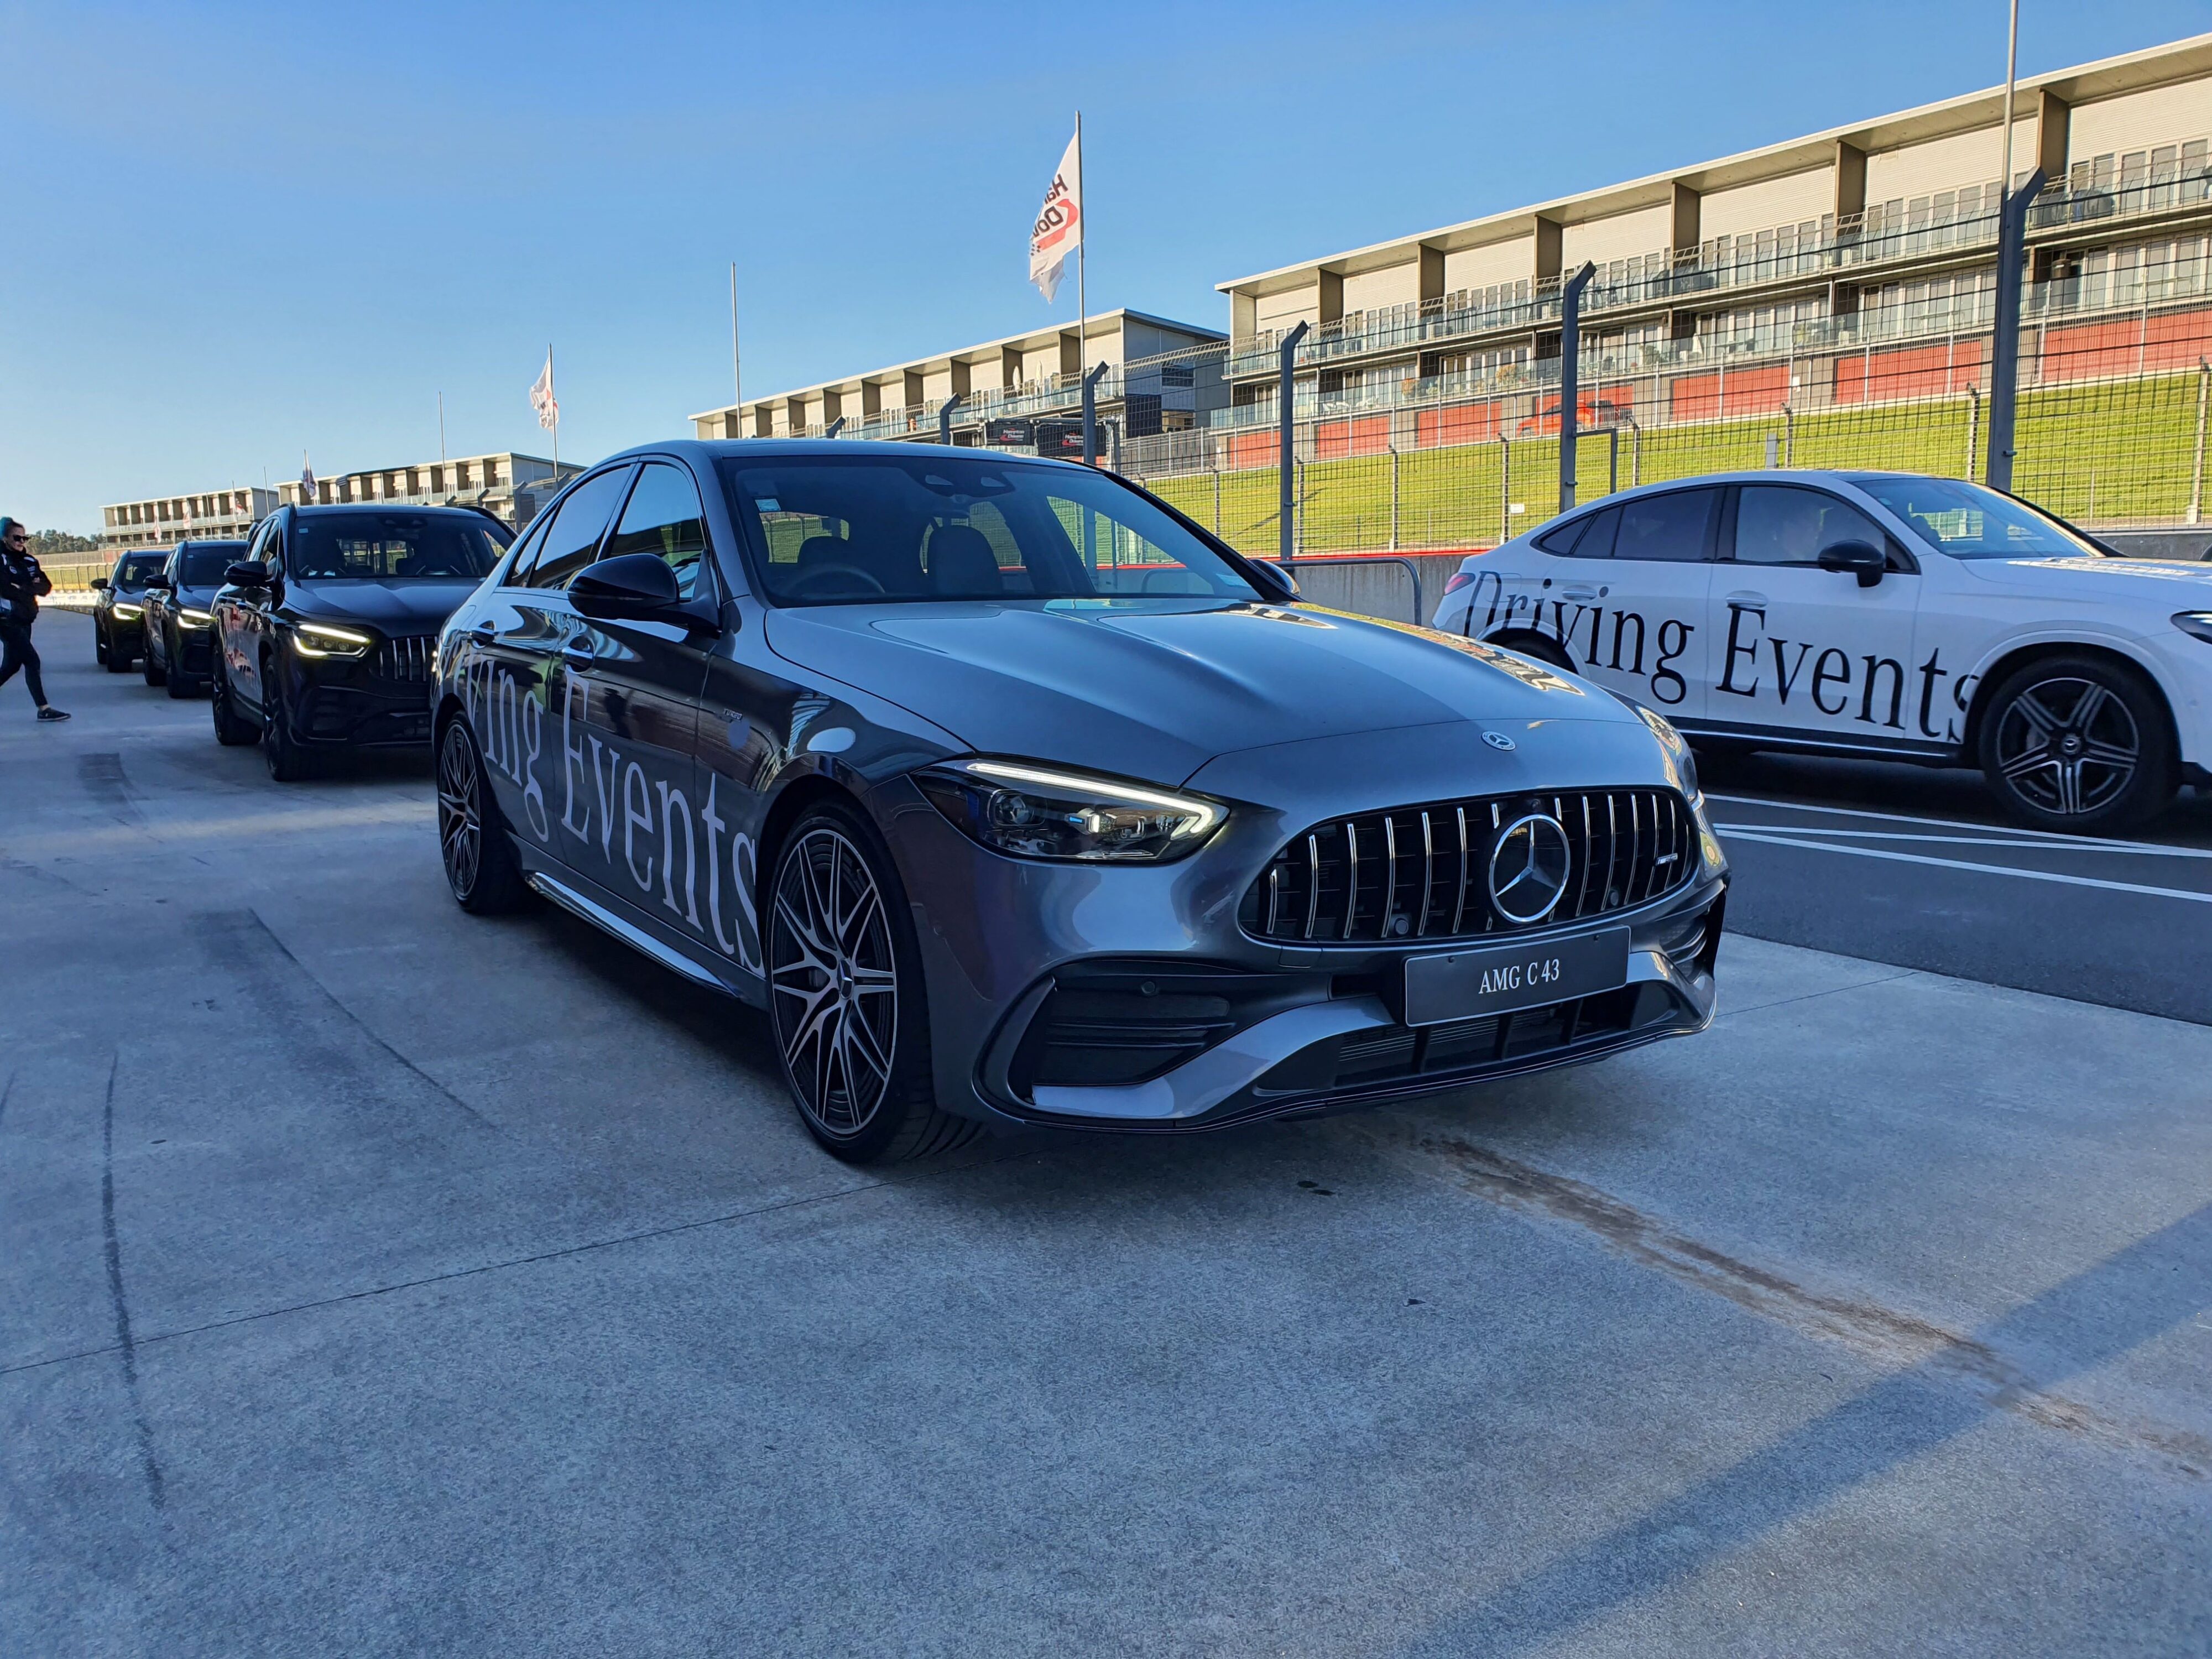 A Mercedes-Benz C43 AMG in the foreground with other Mercedes-Benz cars in the background at the Mercedes Driving Events programme held at Hampton Downs Motorsport Park NZ.